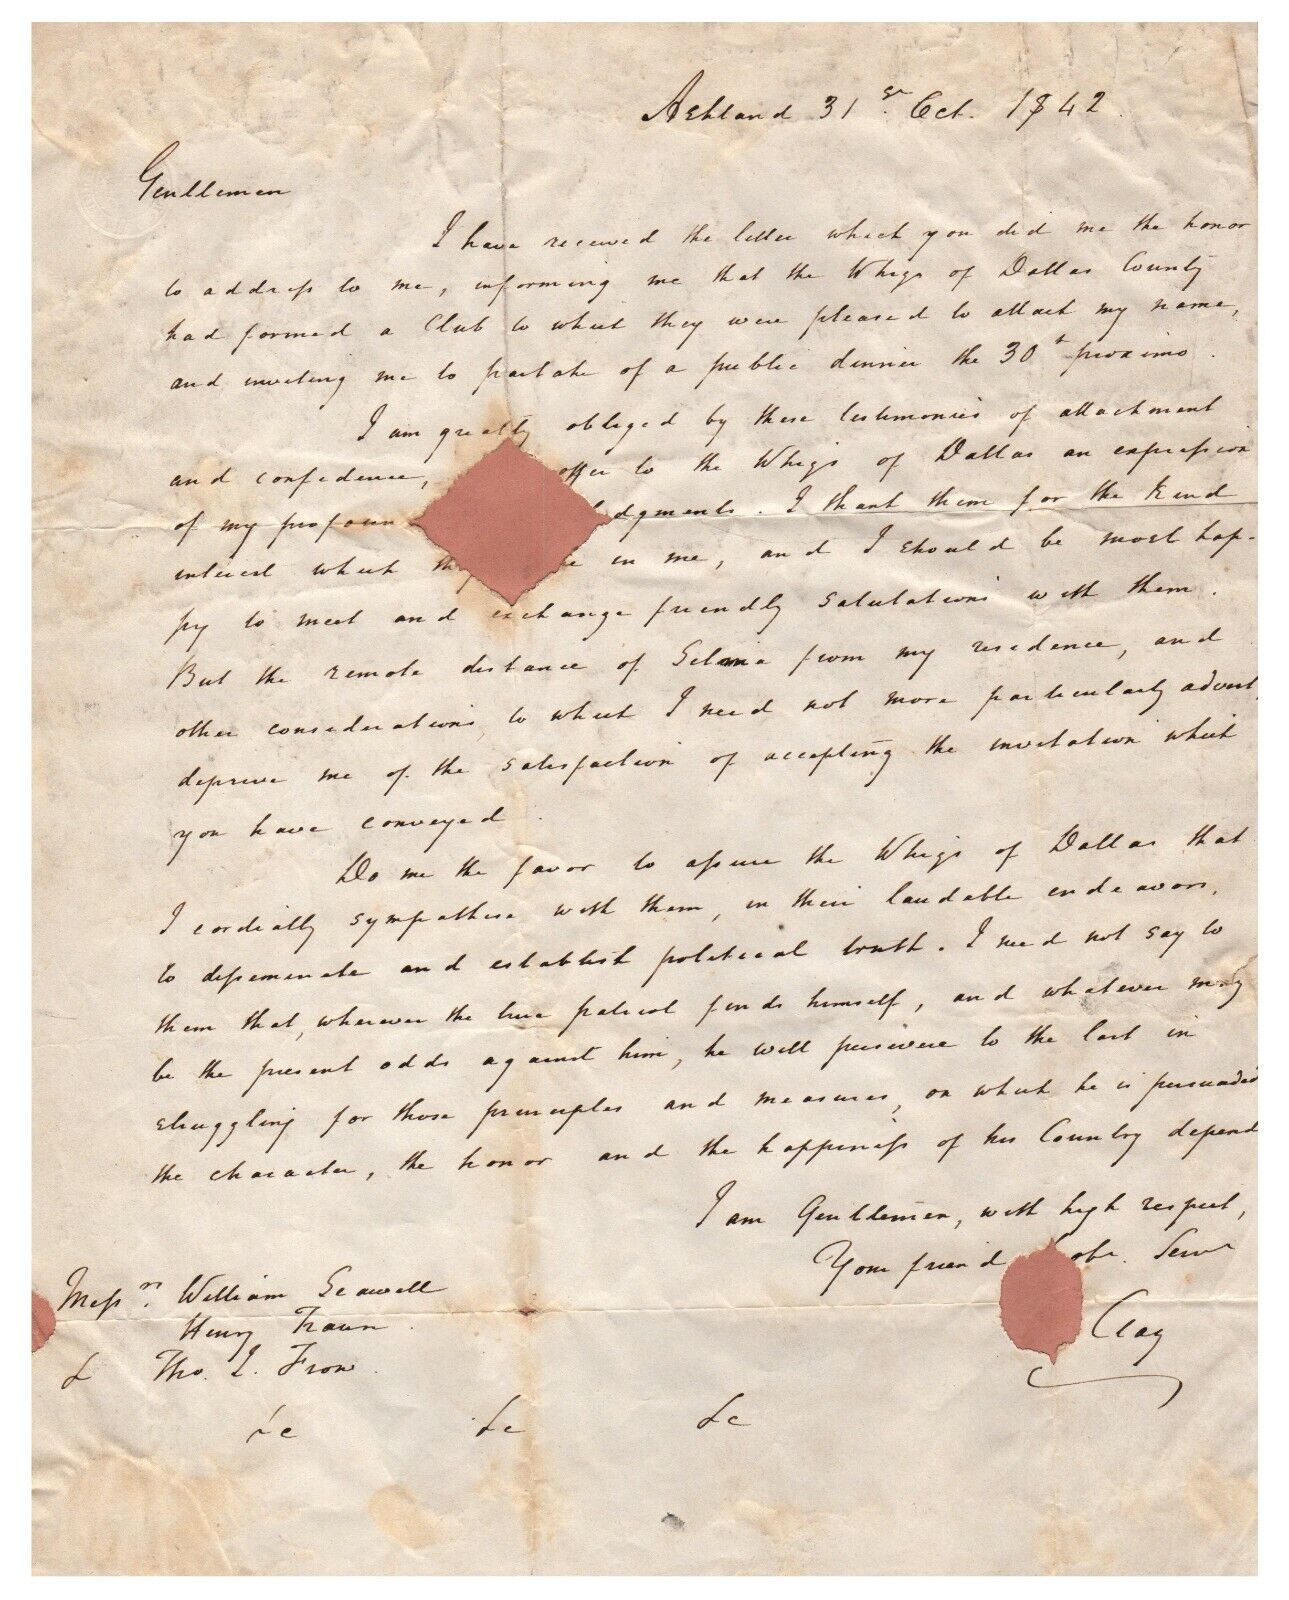 Henry Clay - Autograph Letter Signed - Provides His Definition of Patriotism